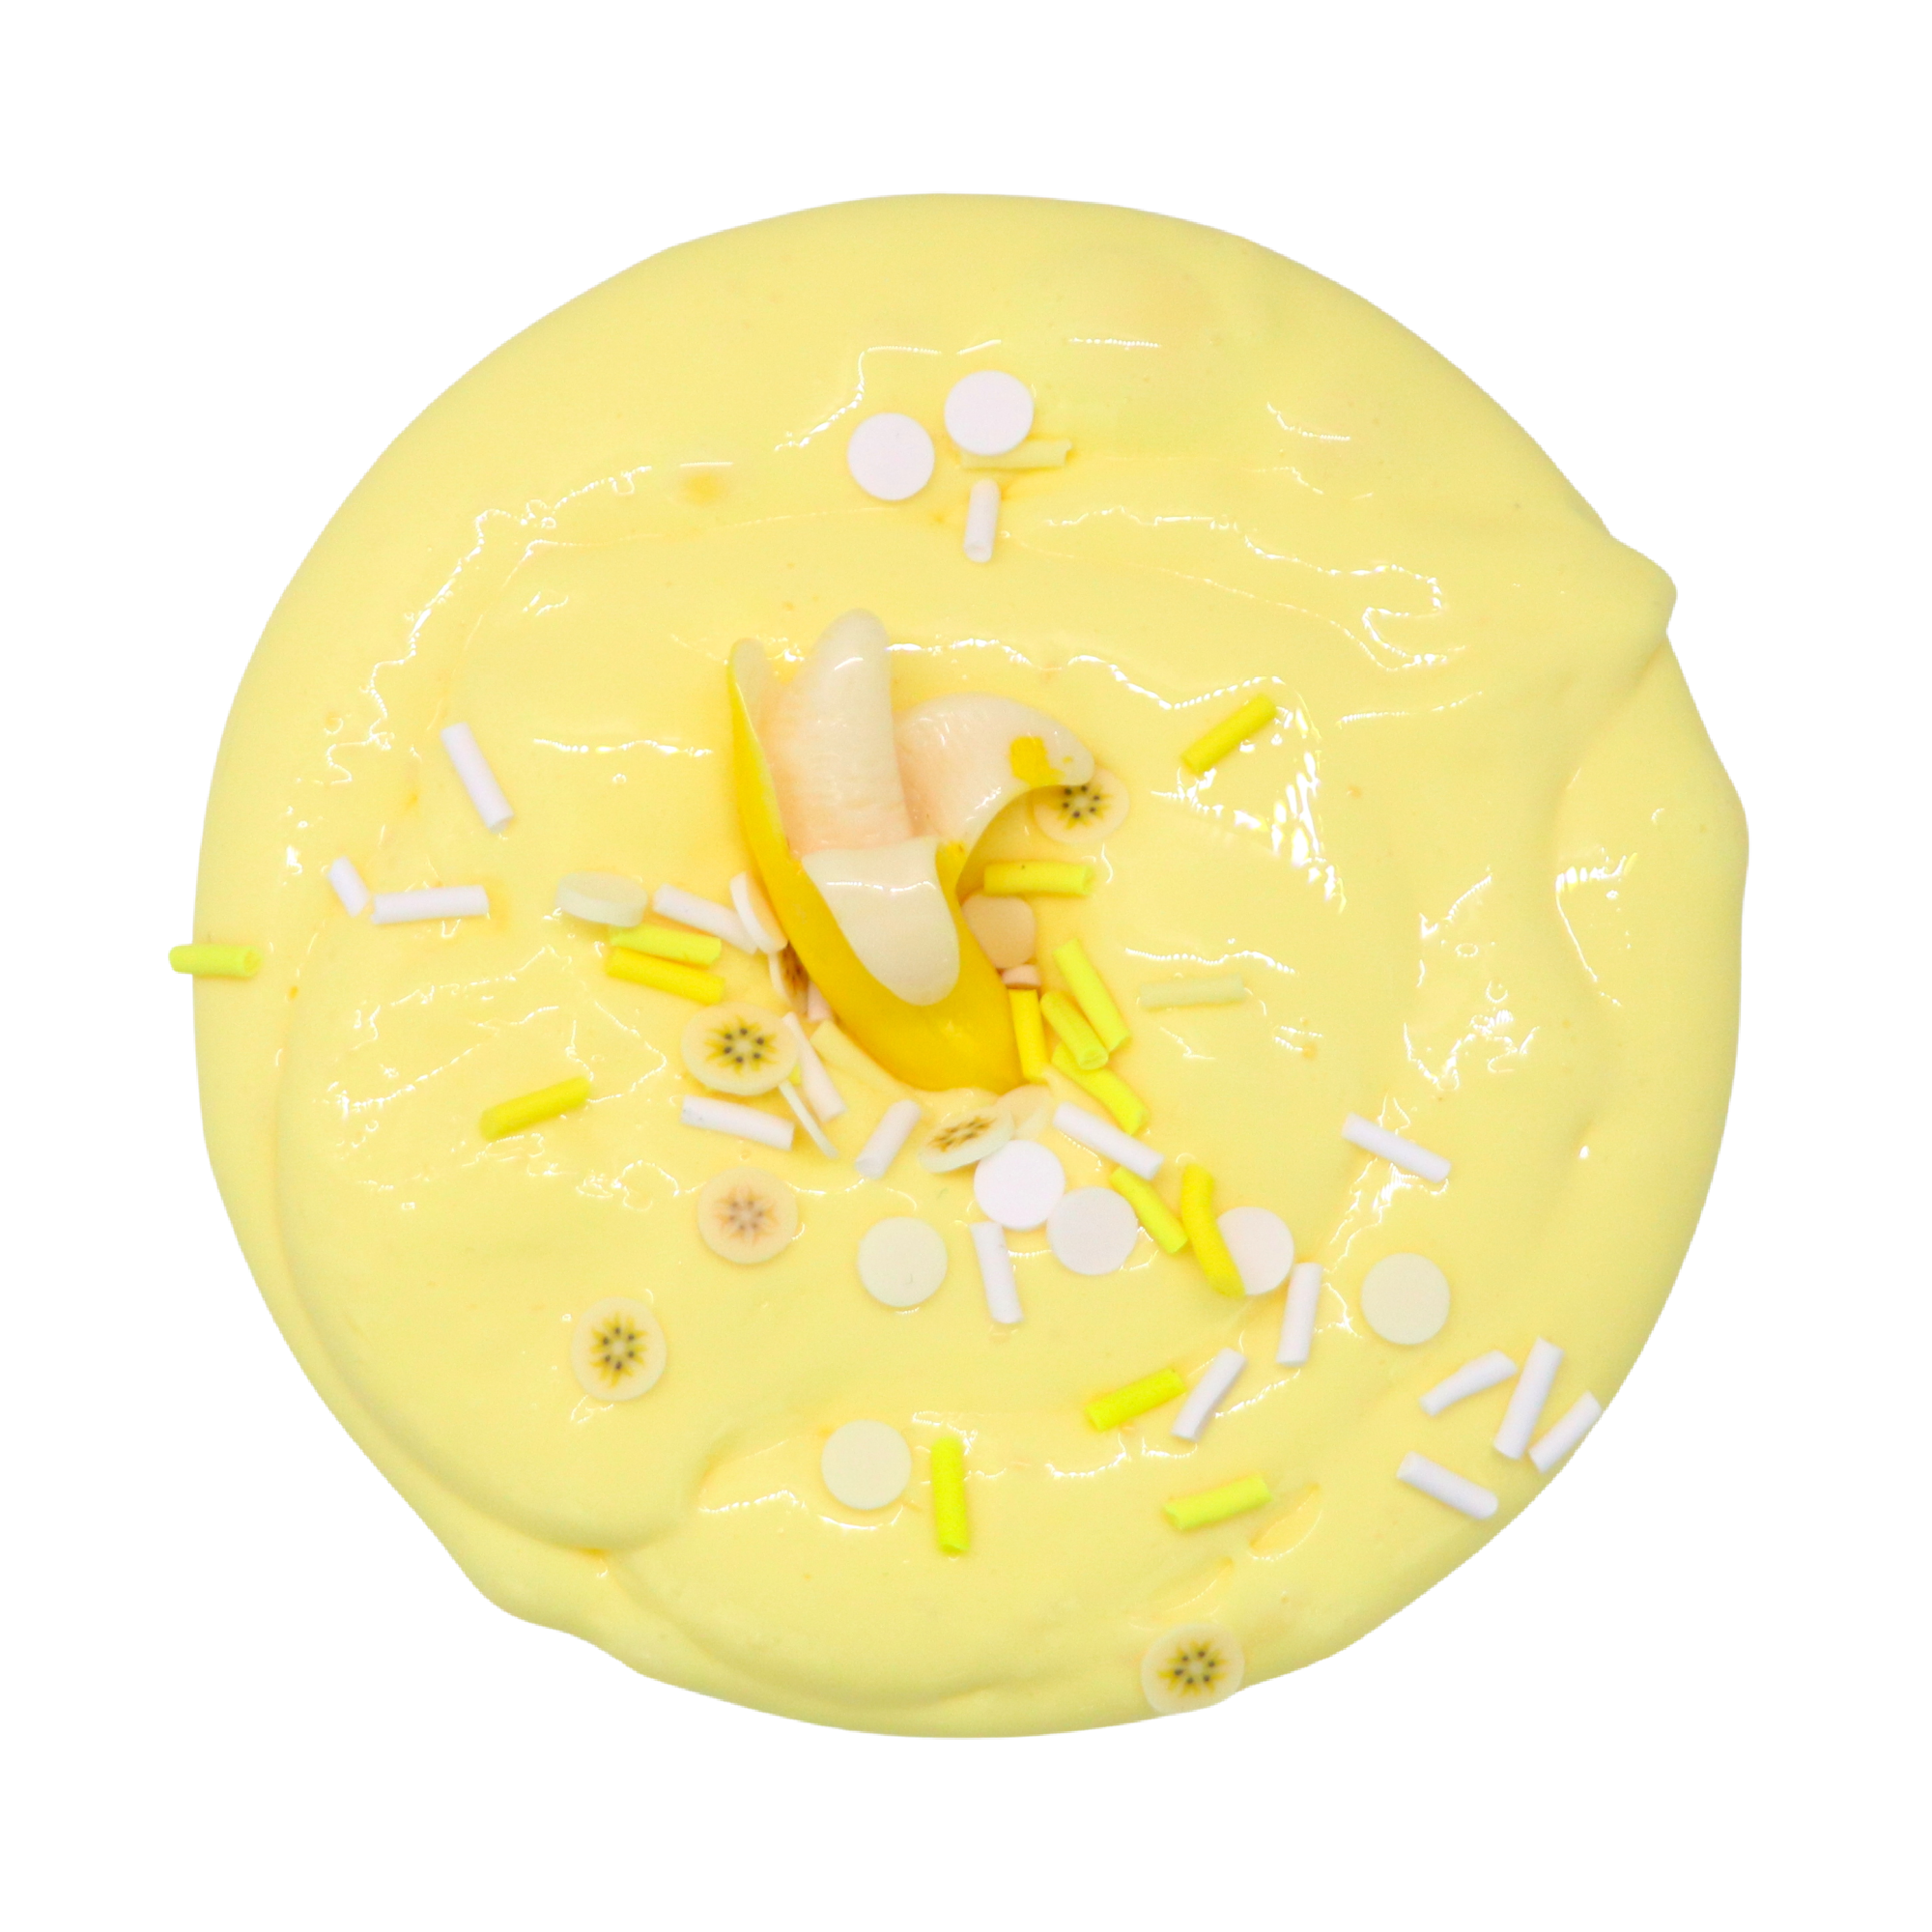 Butter cheese slime/Cheese slime/Banana slime/Scented slime/Cheese